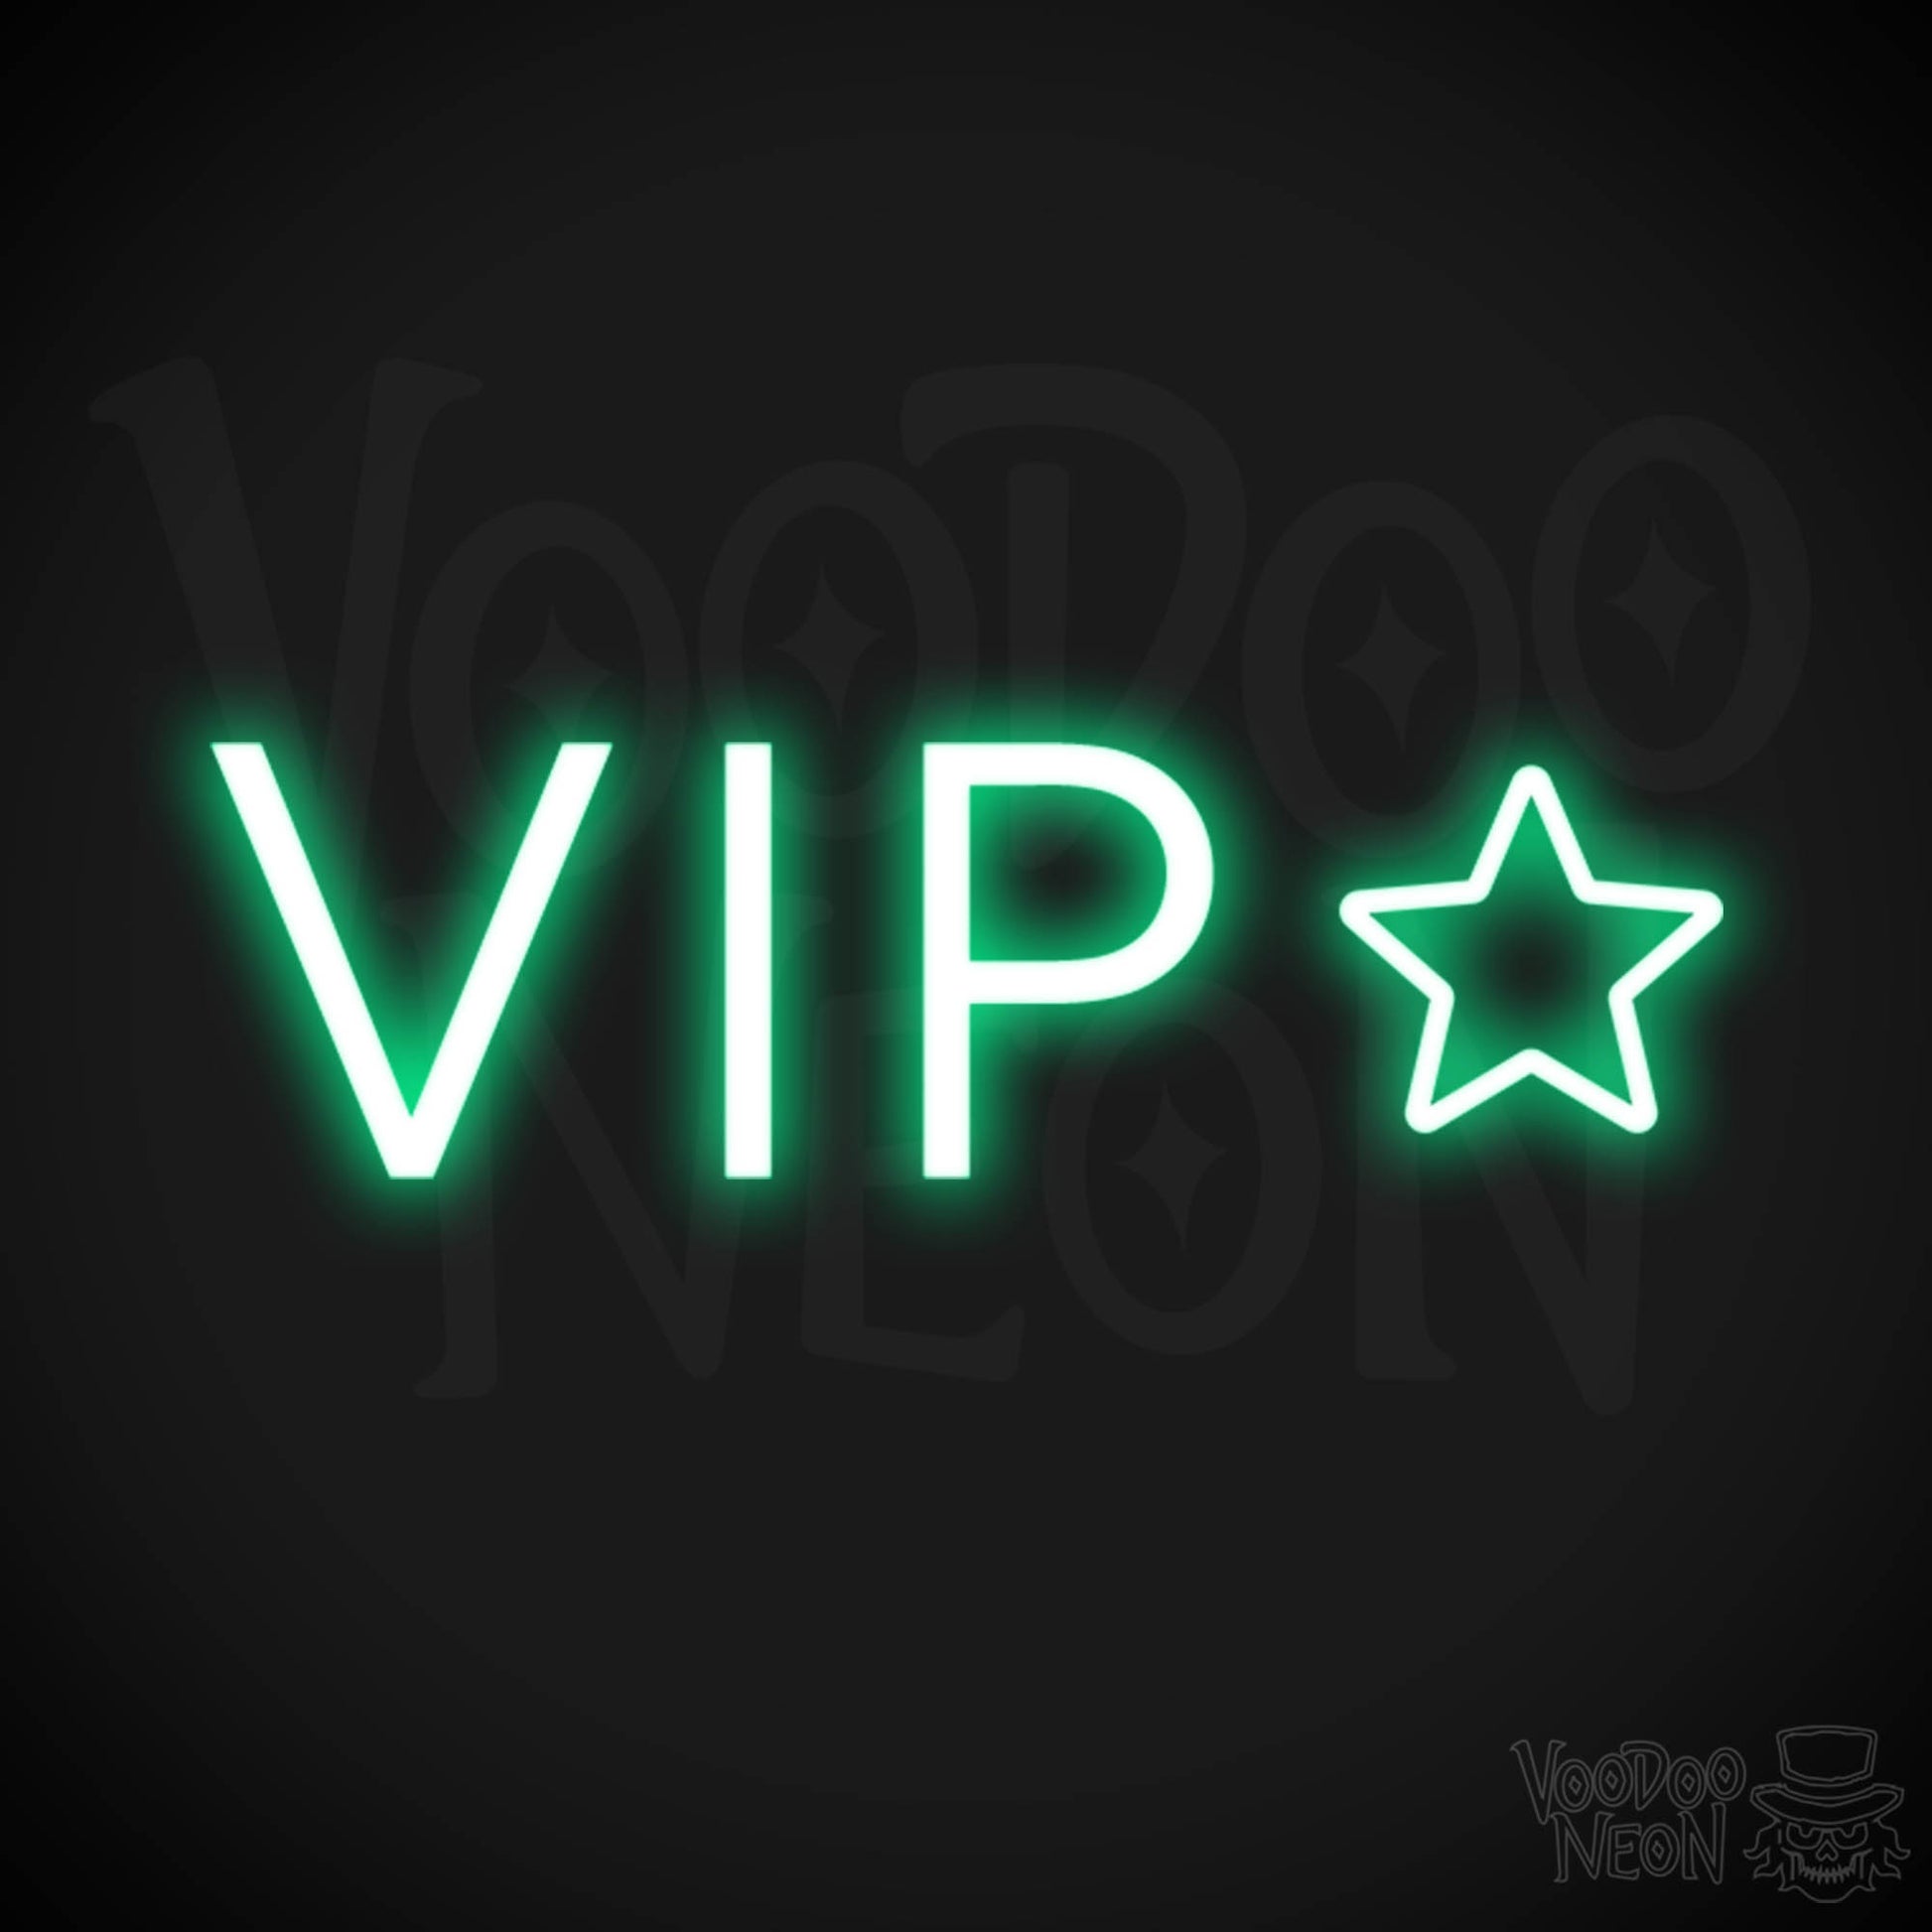 VIP Neon Sign - Neon VIP Sign - VIP LED Sign - Color Green